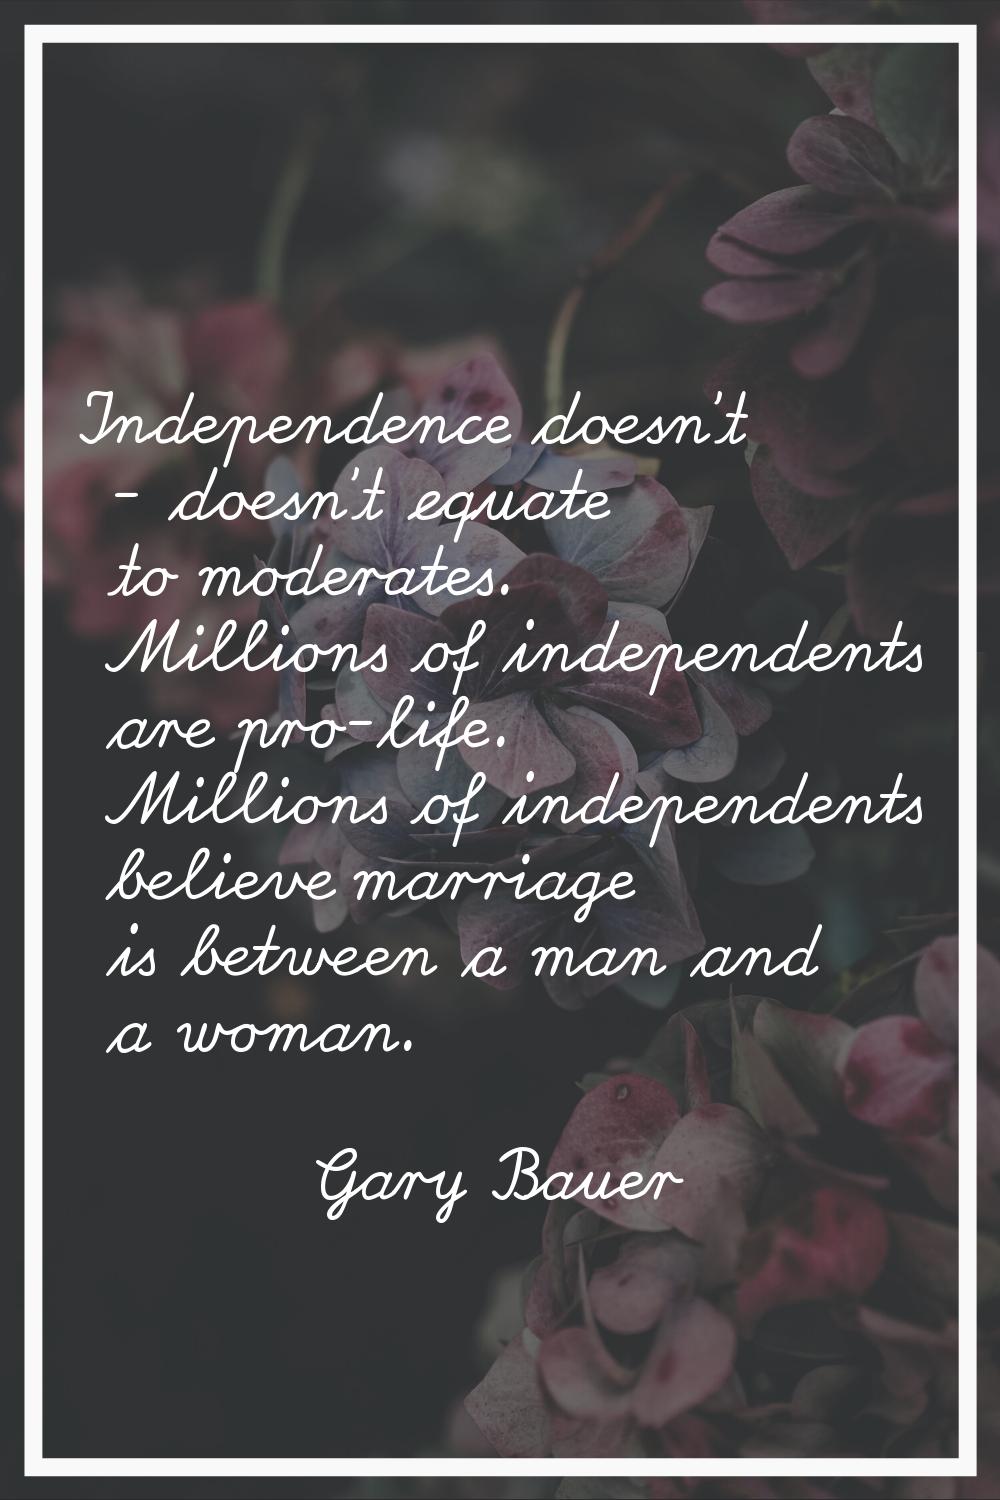 Independence doesn't - doesn't equate to moderates. Millions of independents are pro-life. Millions